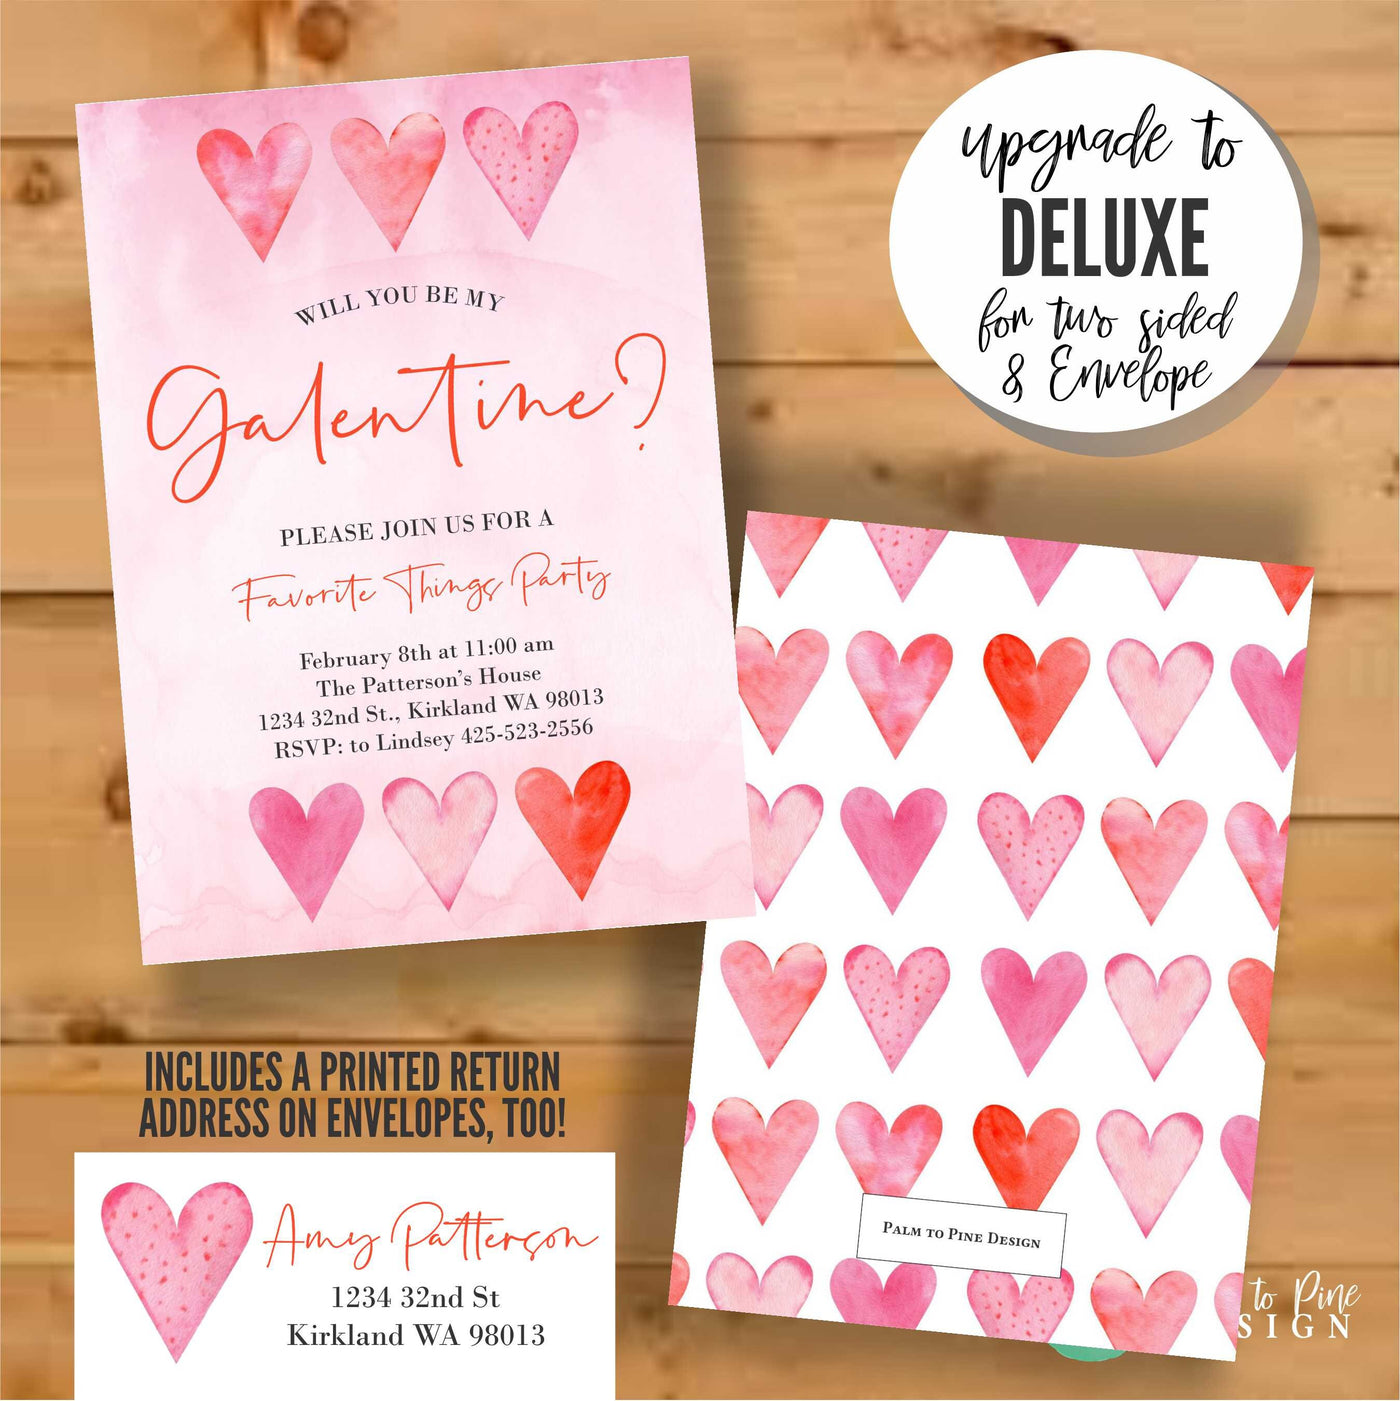 Galentine's Invite, Galentines Invitation, Valentine's Invite, Galentines Day, Watercolor Galentines day party, Pink Watercolor Hearts, pink